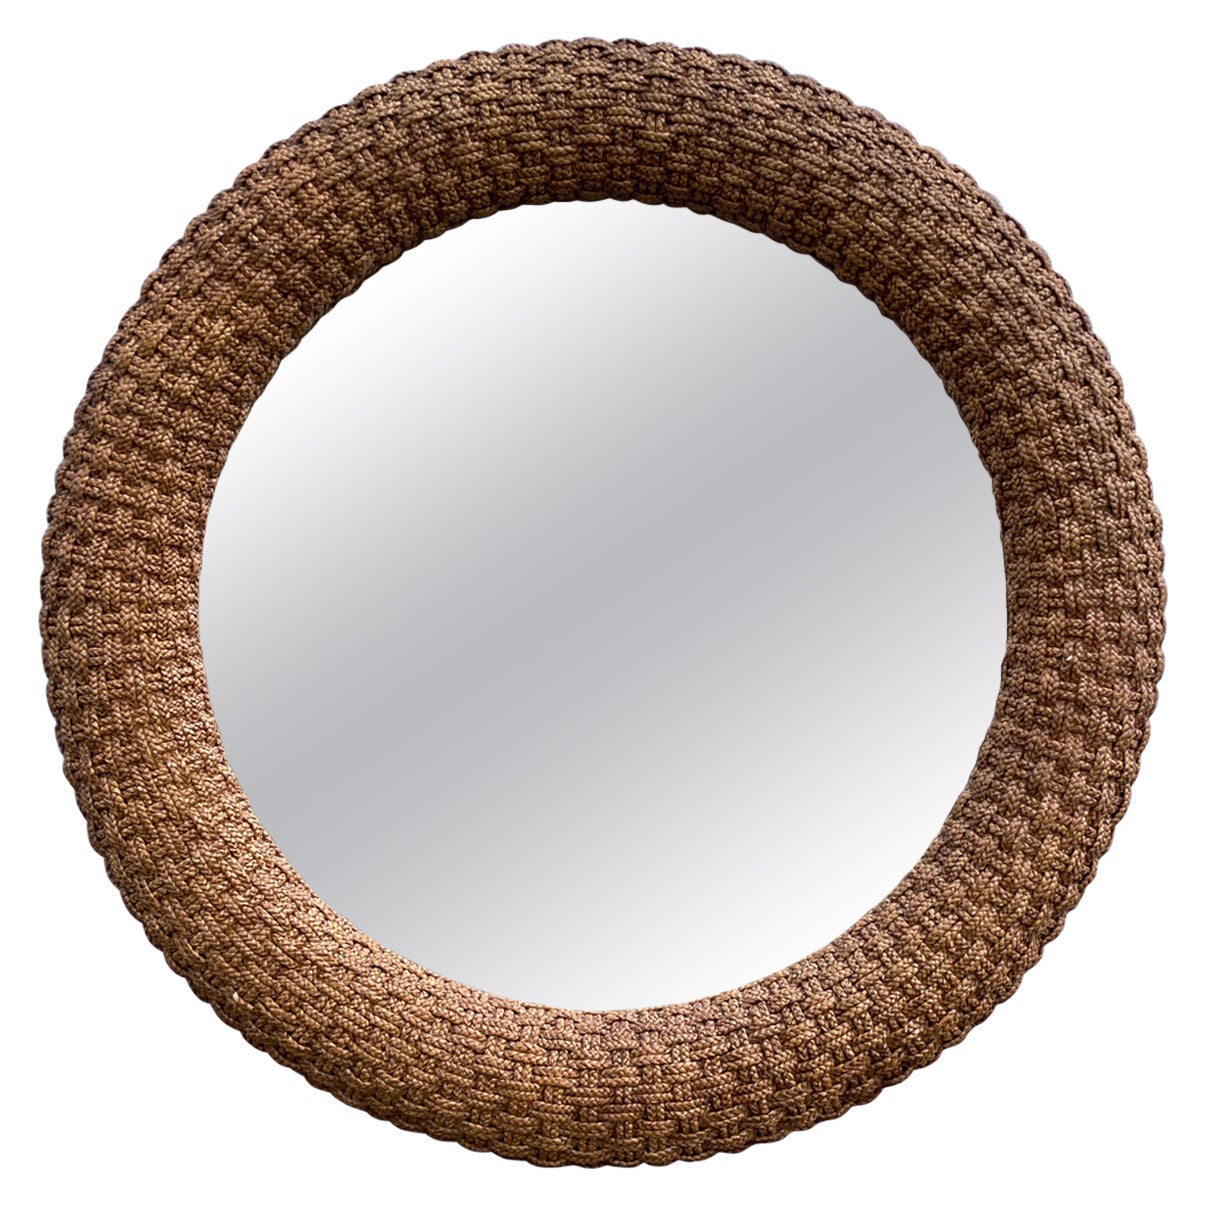 Natural Woven Seagrass Mirror For Sale